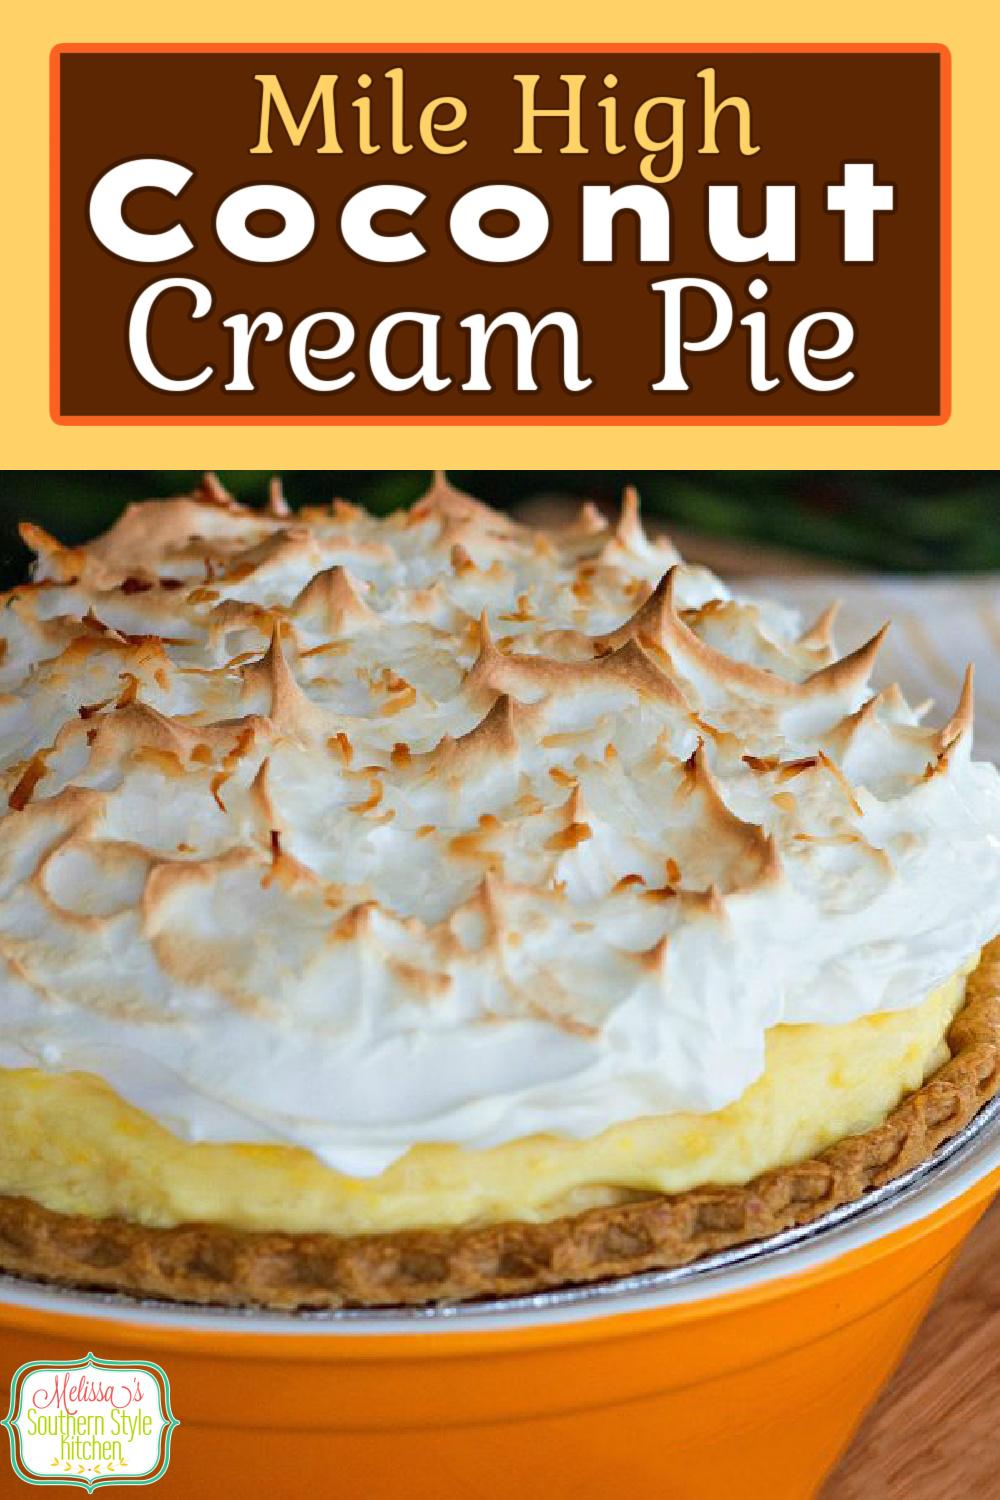 This Mile High Coconut Cream Pie is filled with a dreamy no-bake filling that's simply delicious! #coconutcreampie #coconutpie #pierecipes #Southerncoconutcreampie #pies #southernrecipes #milehighcoconutcreampie